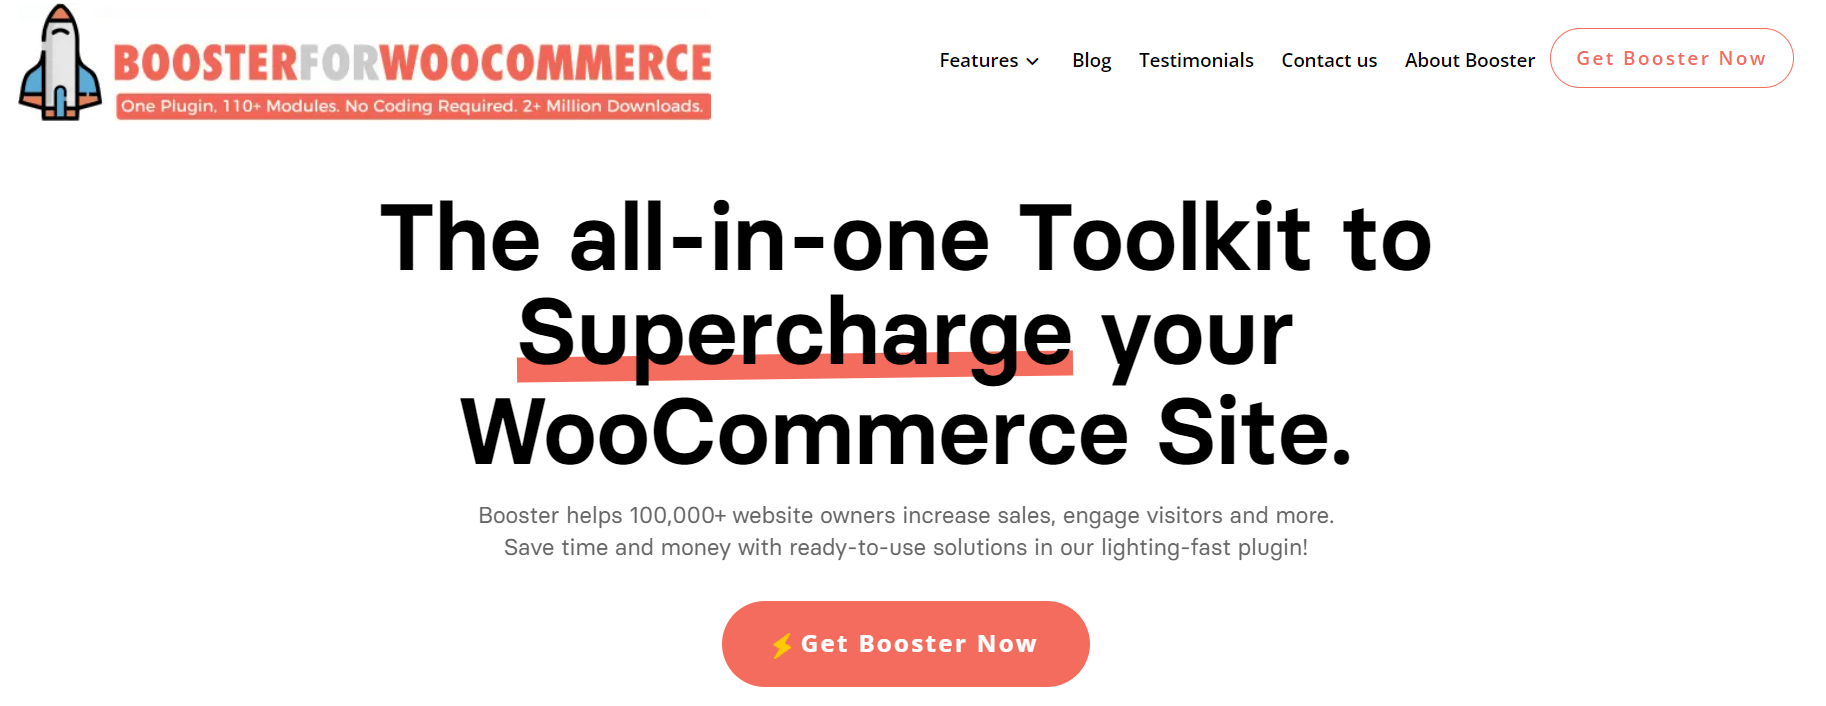 Booster for WooCommerce 